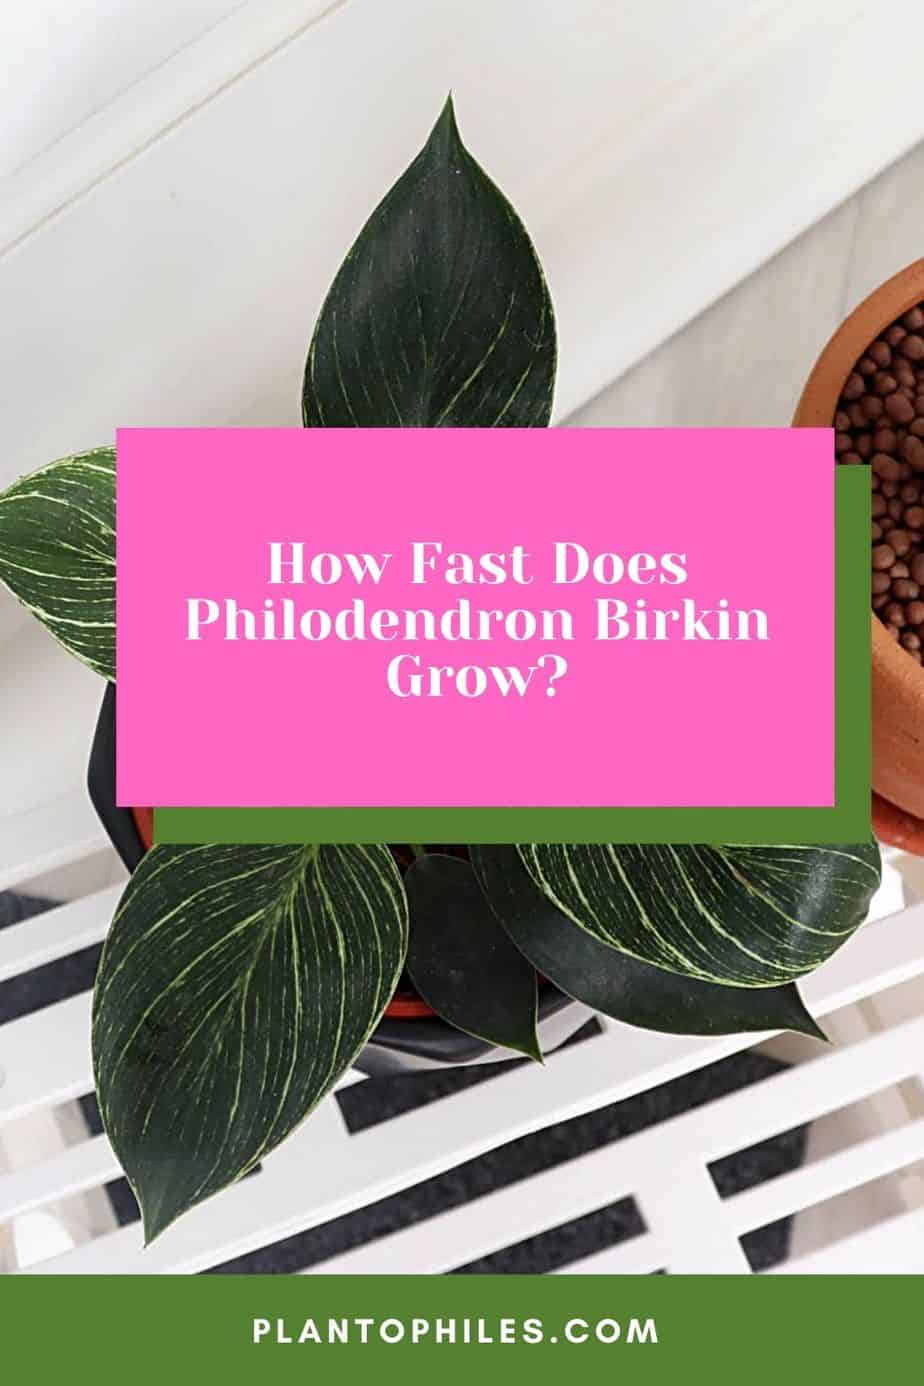 How Fast Does Philodendron Birkin Grow